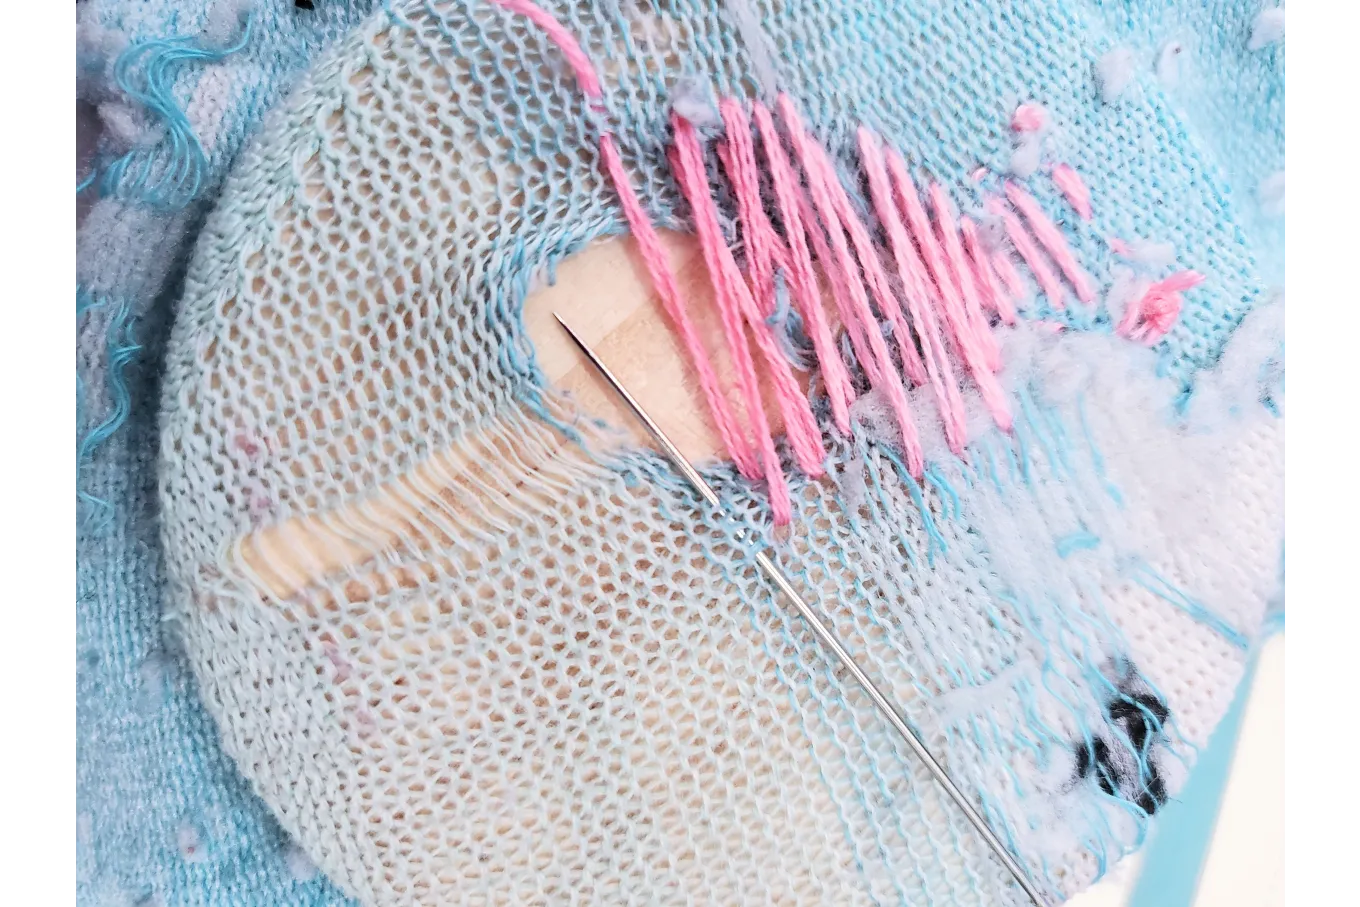 pink thread sewn back and forth over a hole in a blue sock